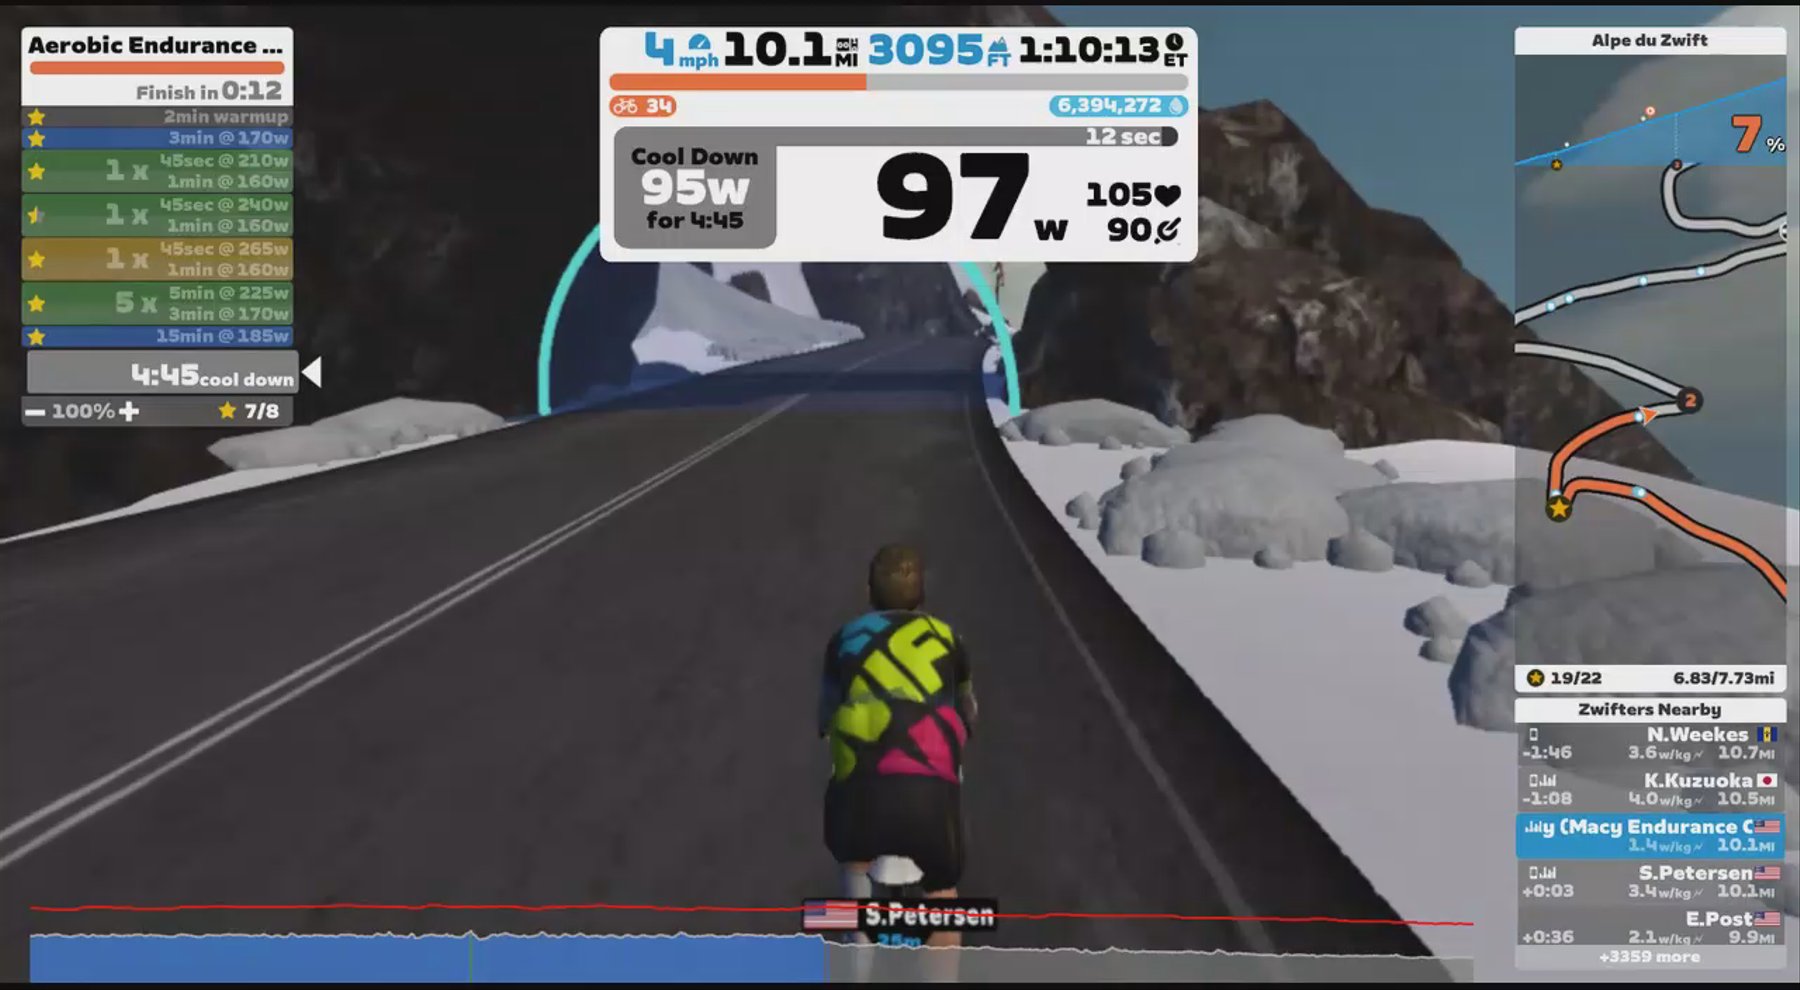 Zwift - Aerobic Endurance with Low Cadence in Watopia